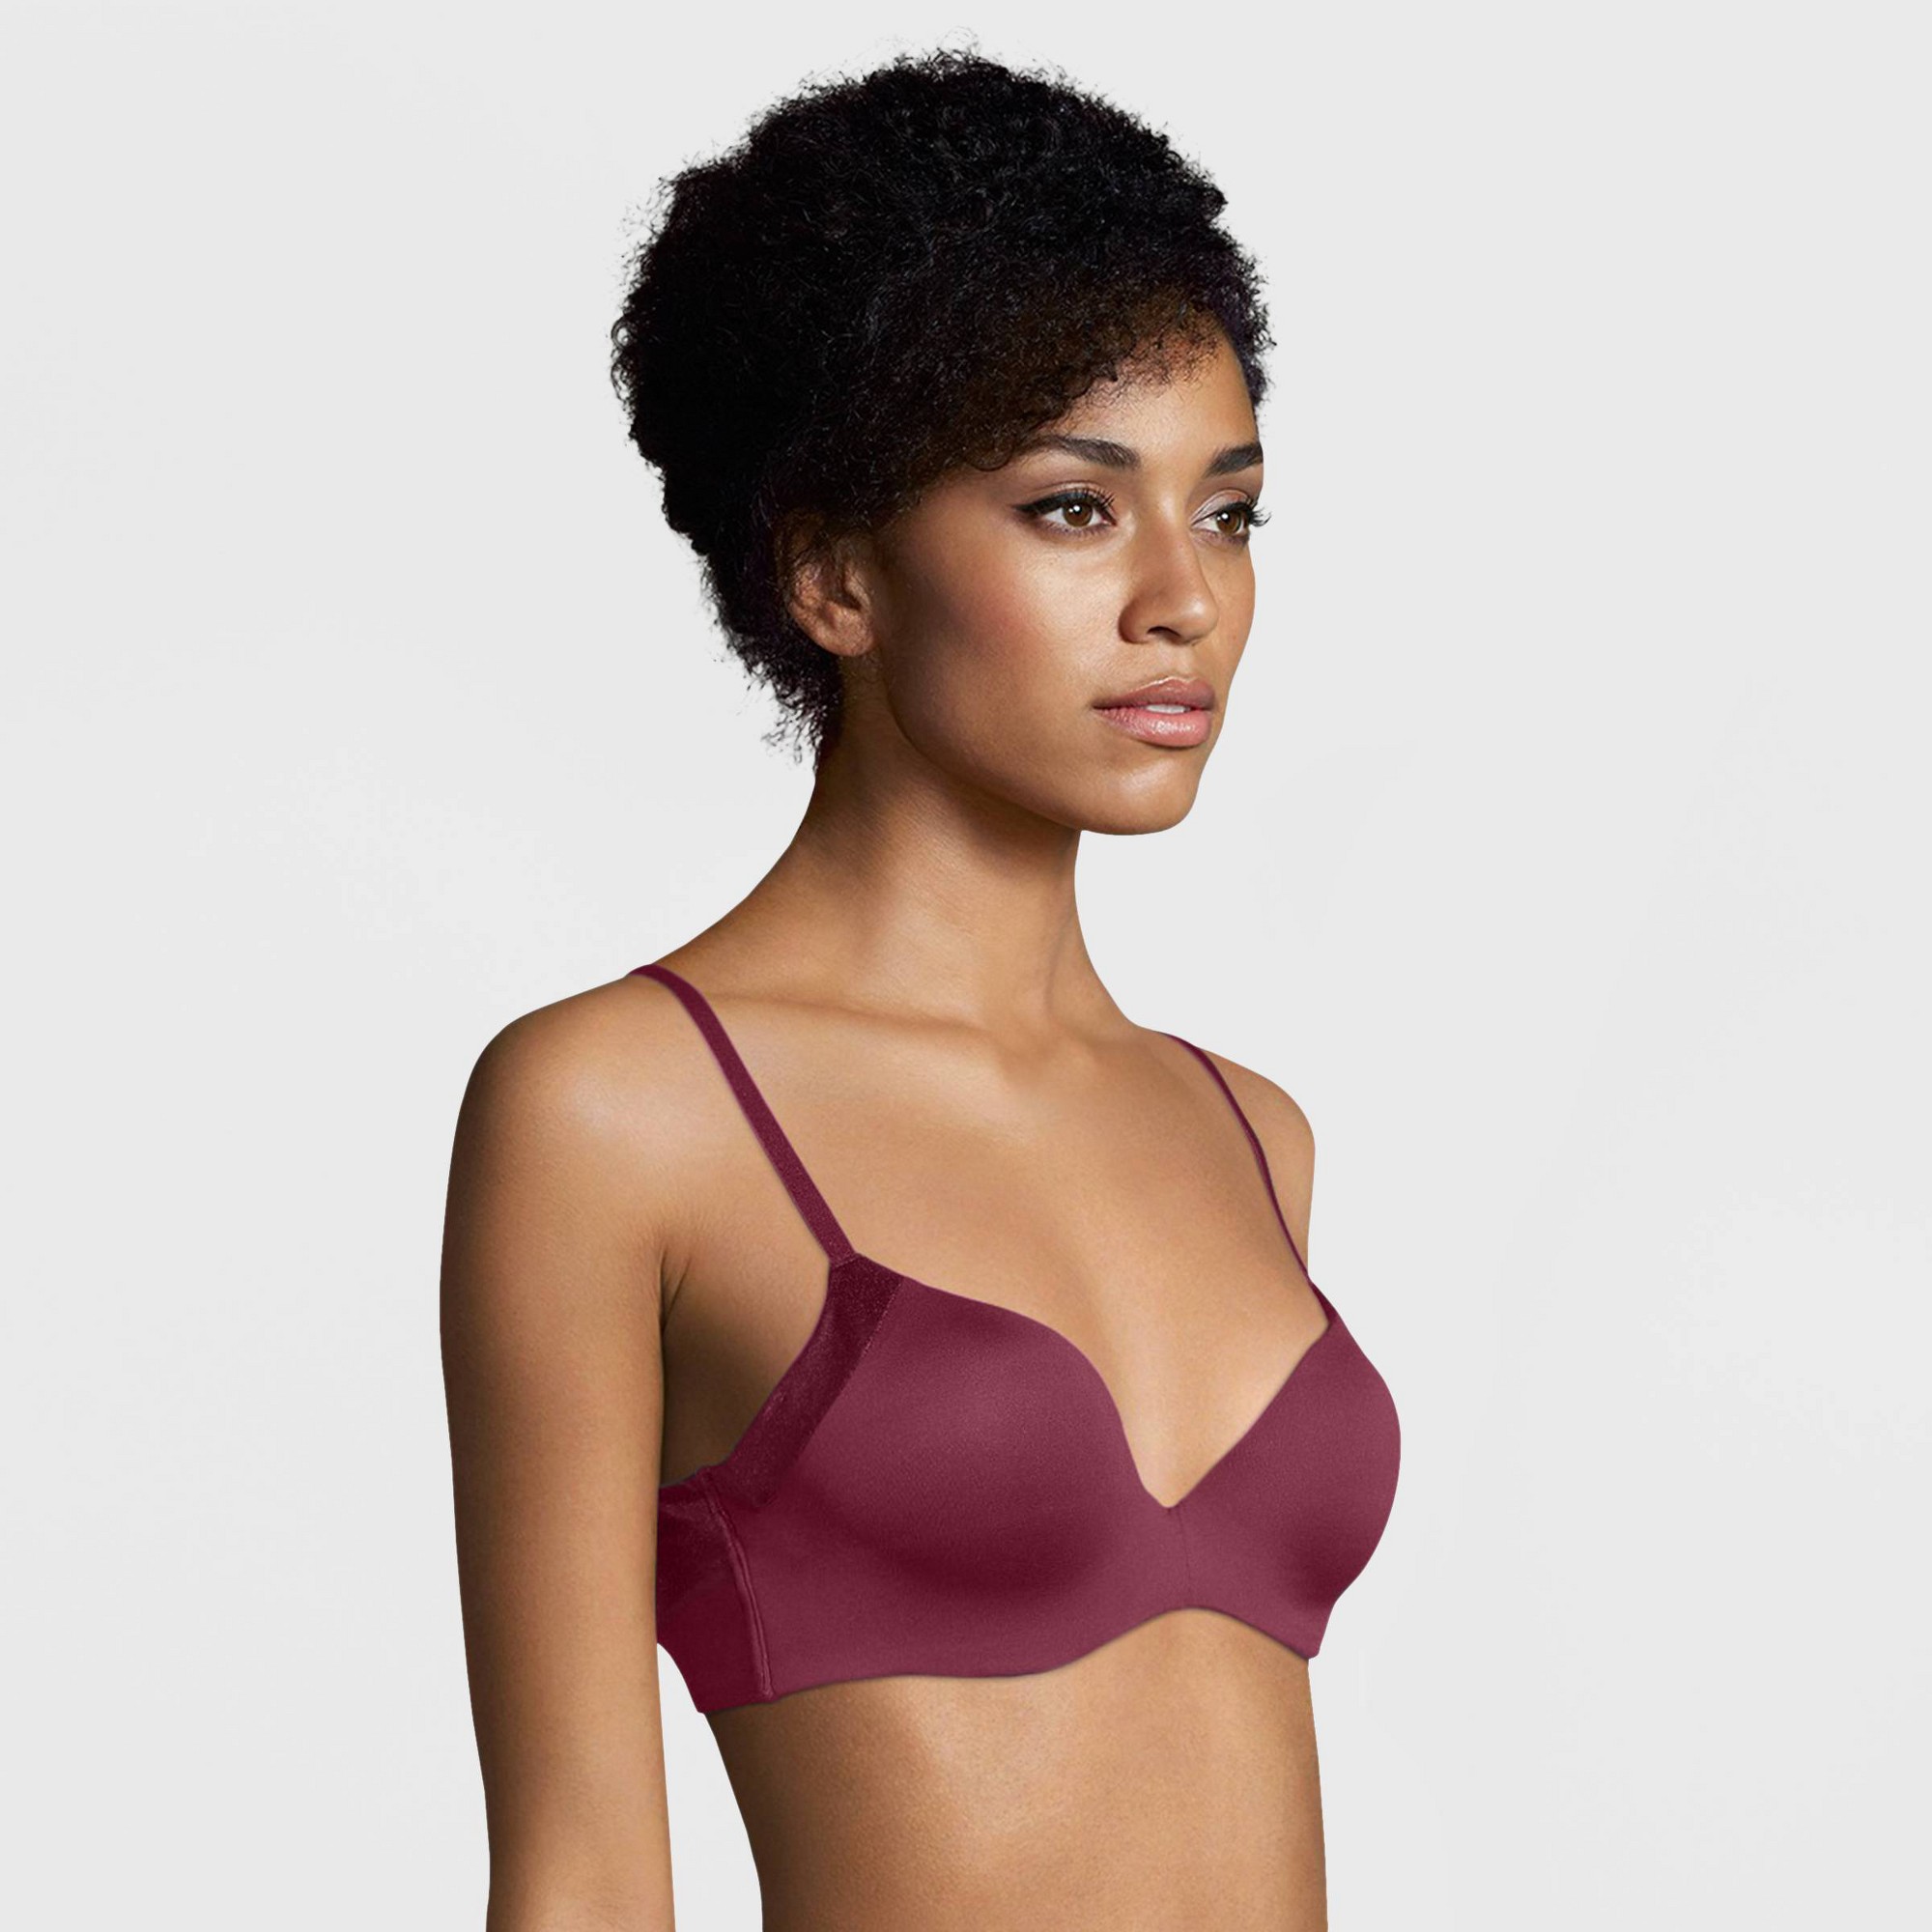 Maidenform Self Expressions Women's Smooth Finish Push-Up Bra SE0009 - Red  36DD, by Maidenform